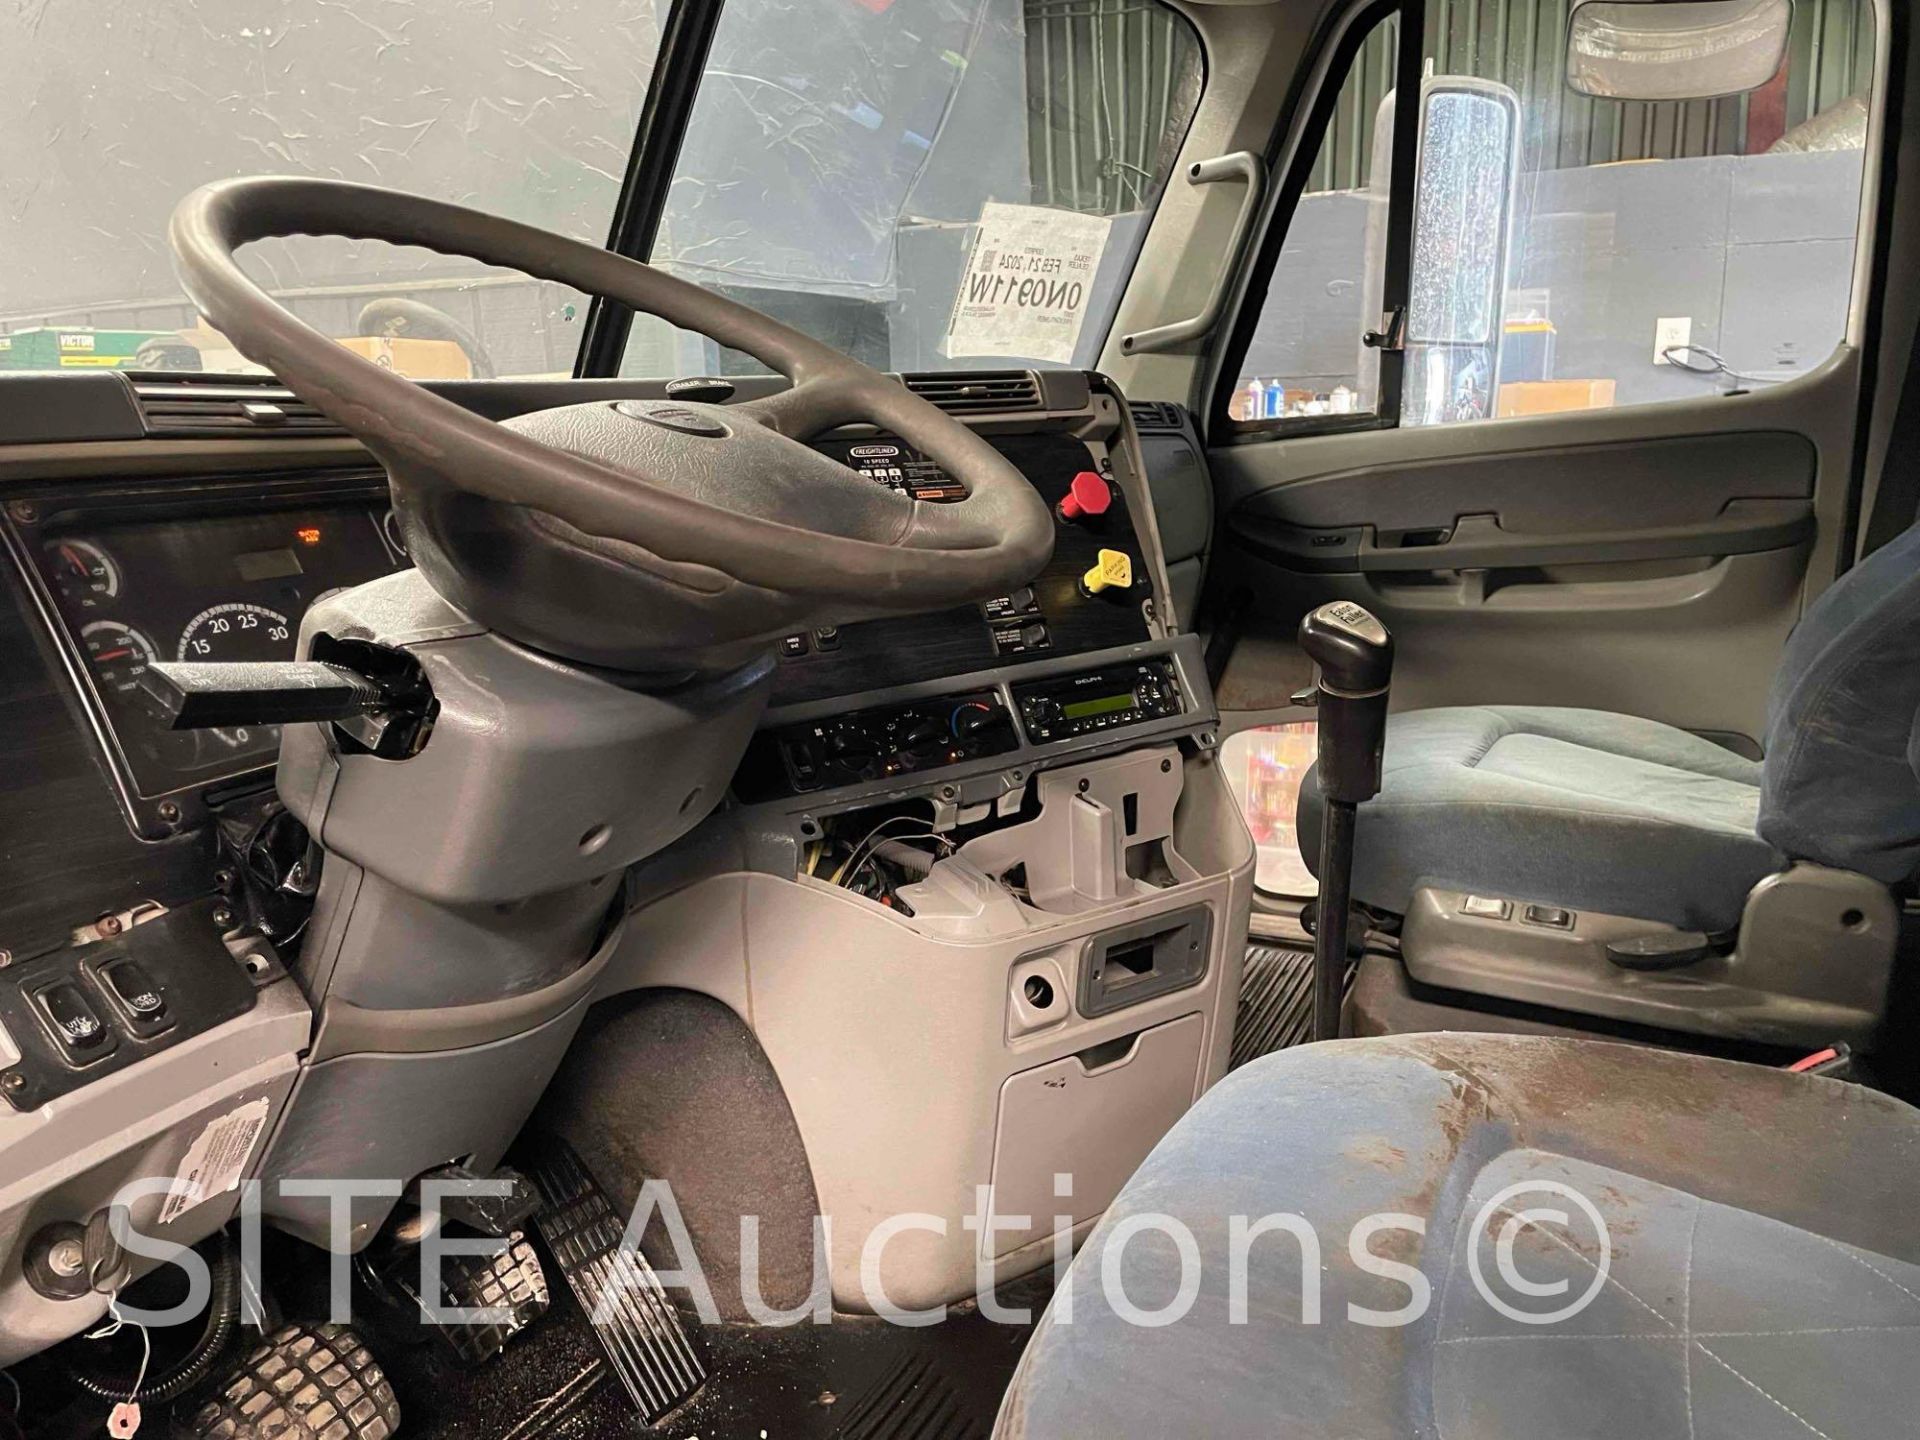 2007 Freightliner Columbia T/A Sleeper Truck Tractor - Image 11 of 17